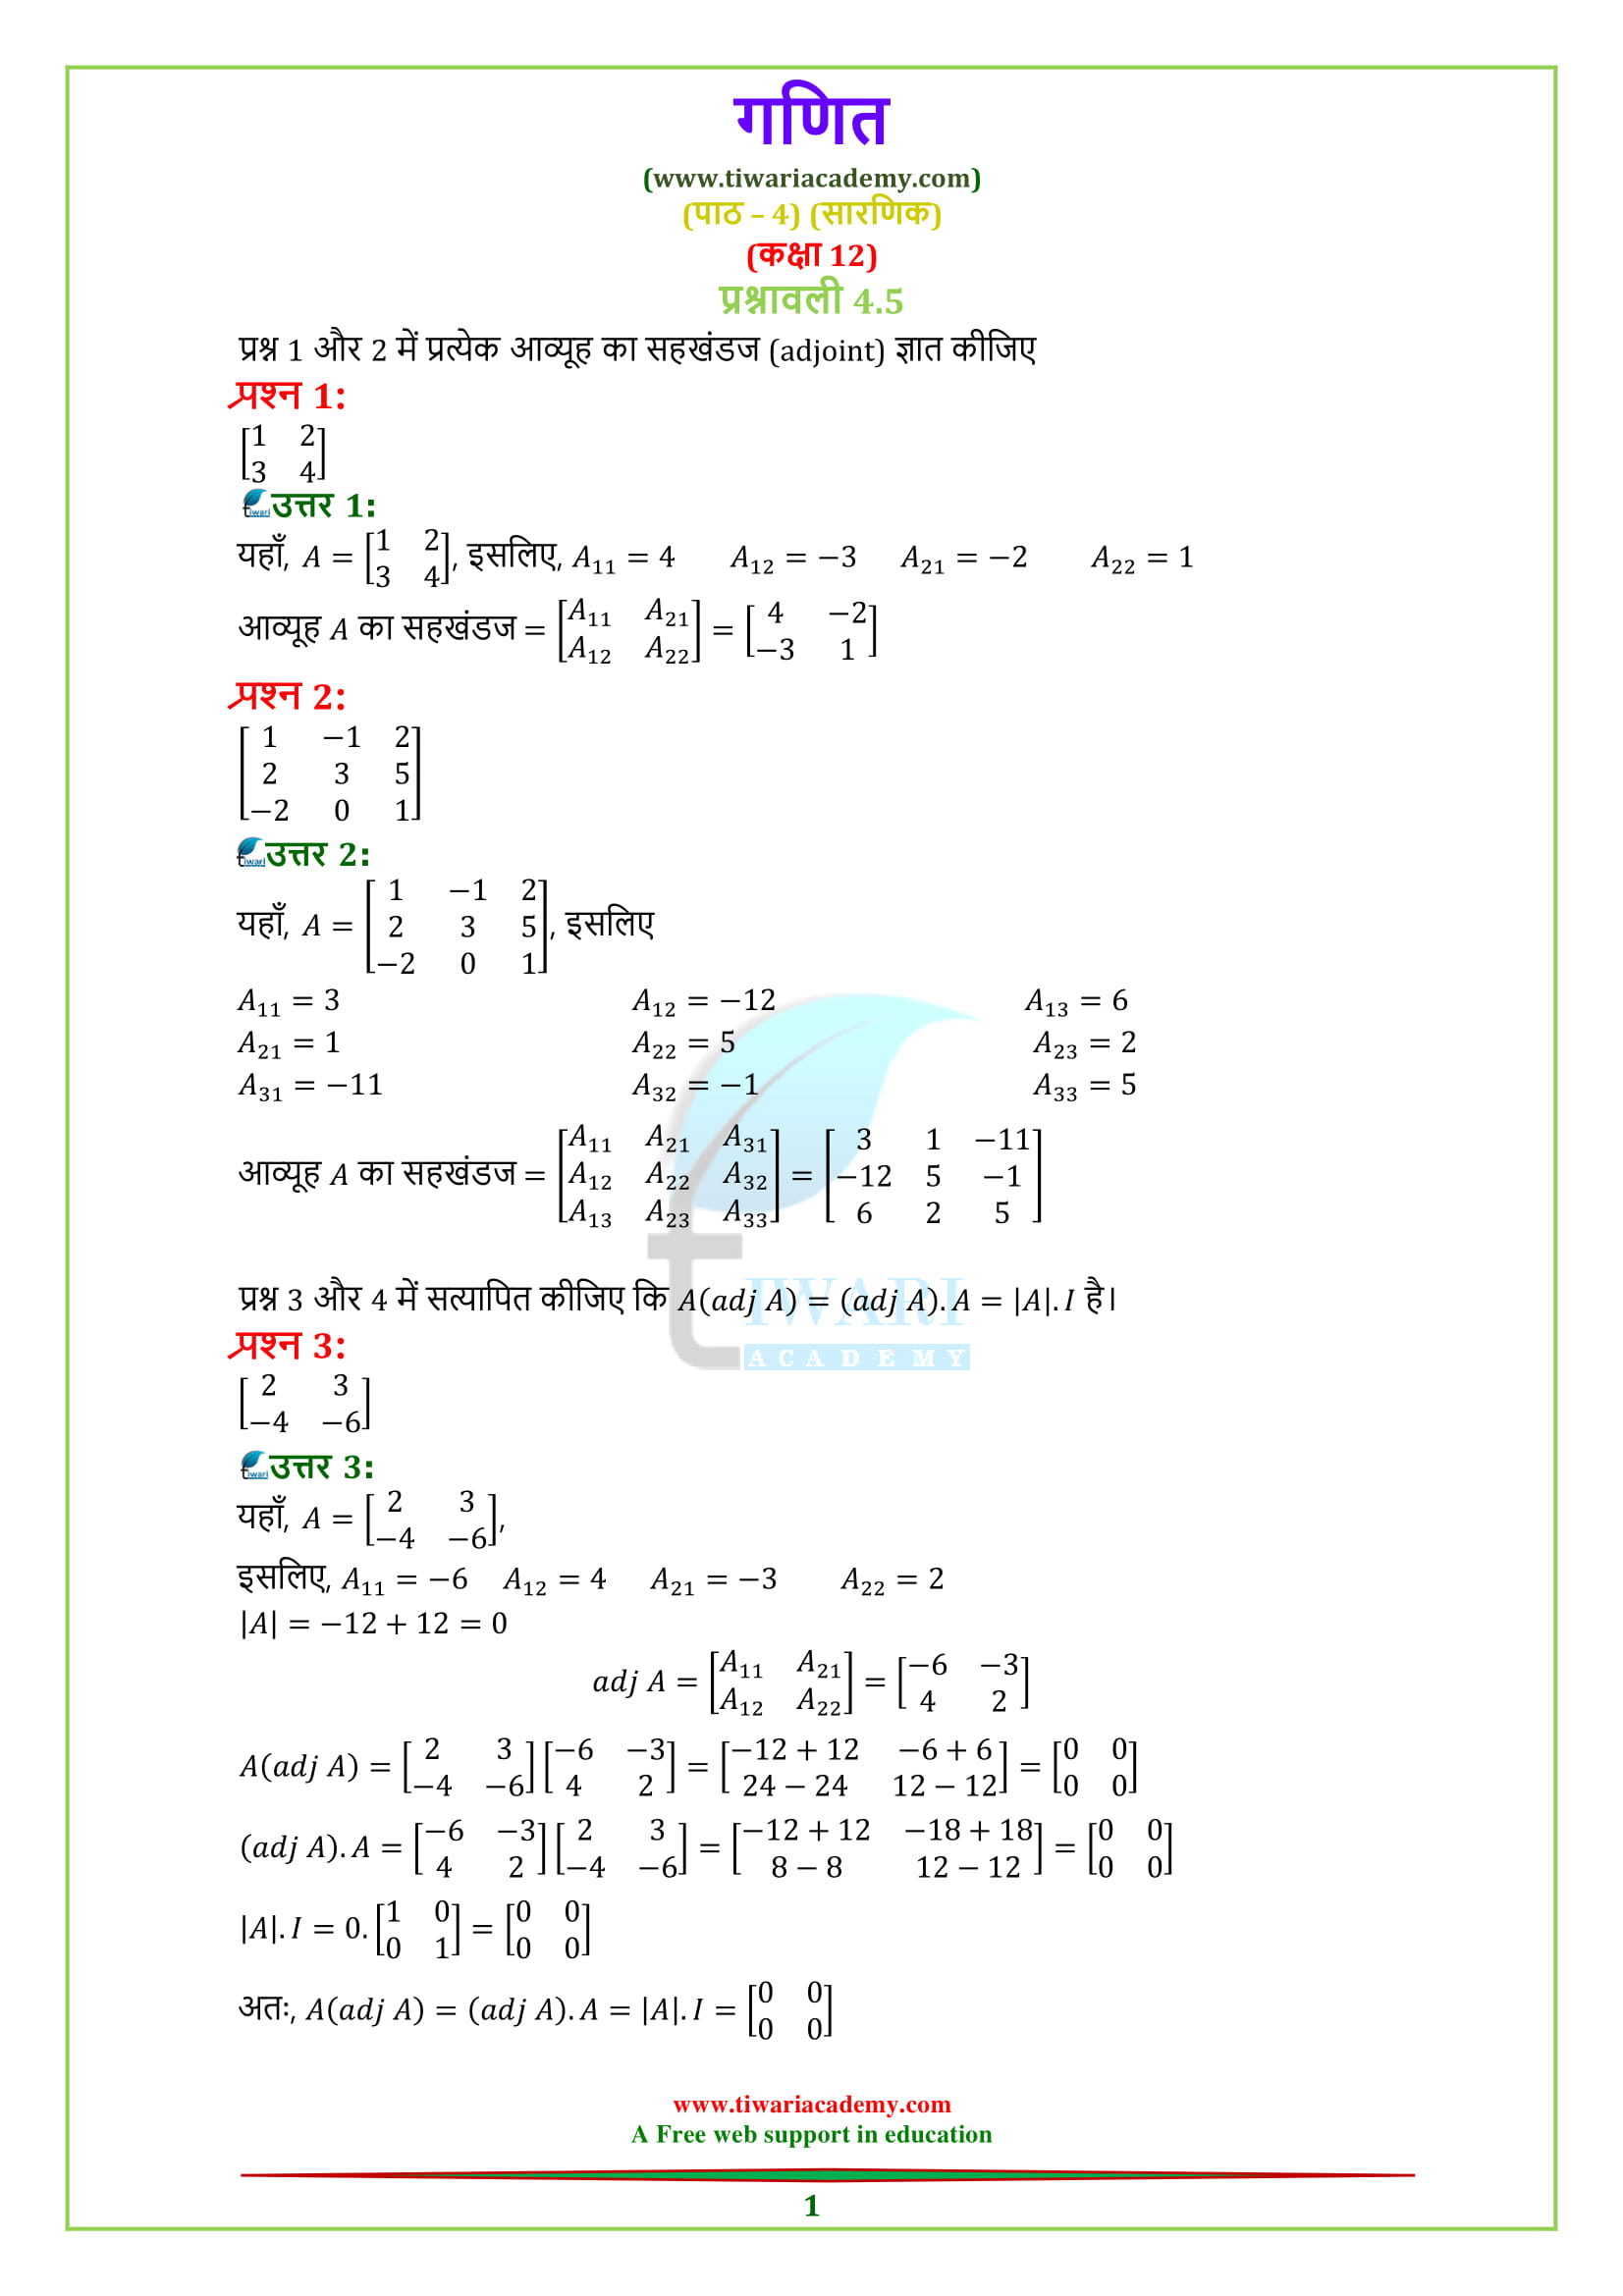 NCERT Solutions for Class 12 Maths Chapter 4 Exercise 4.5 in Hindi Medium